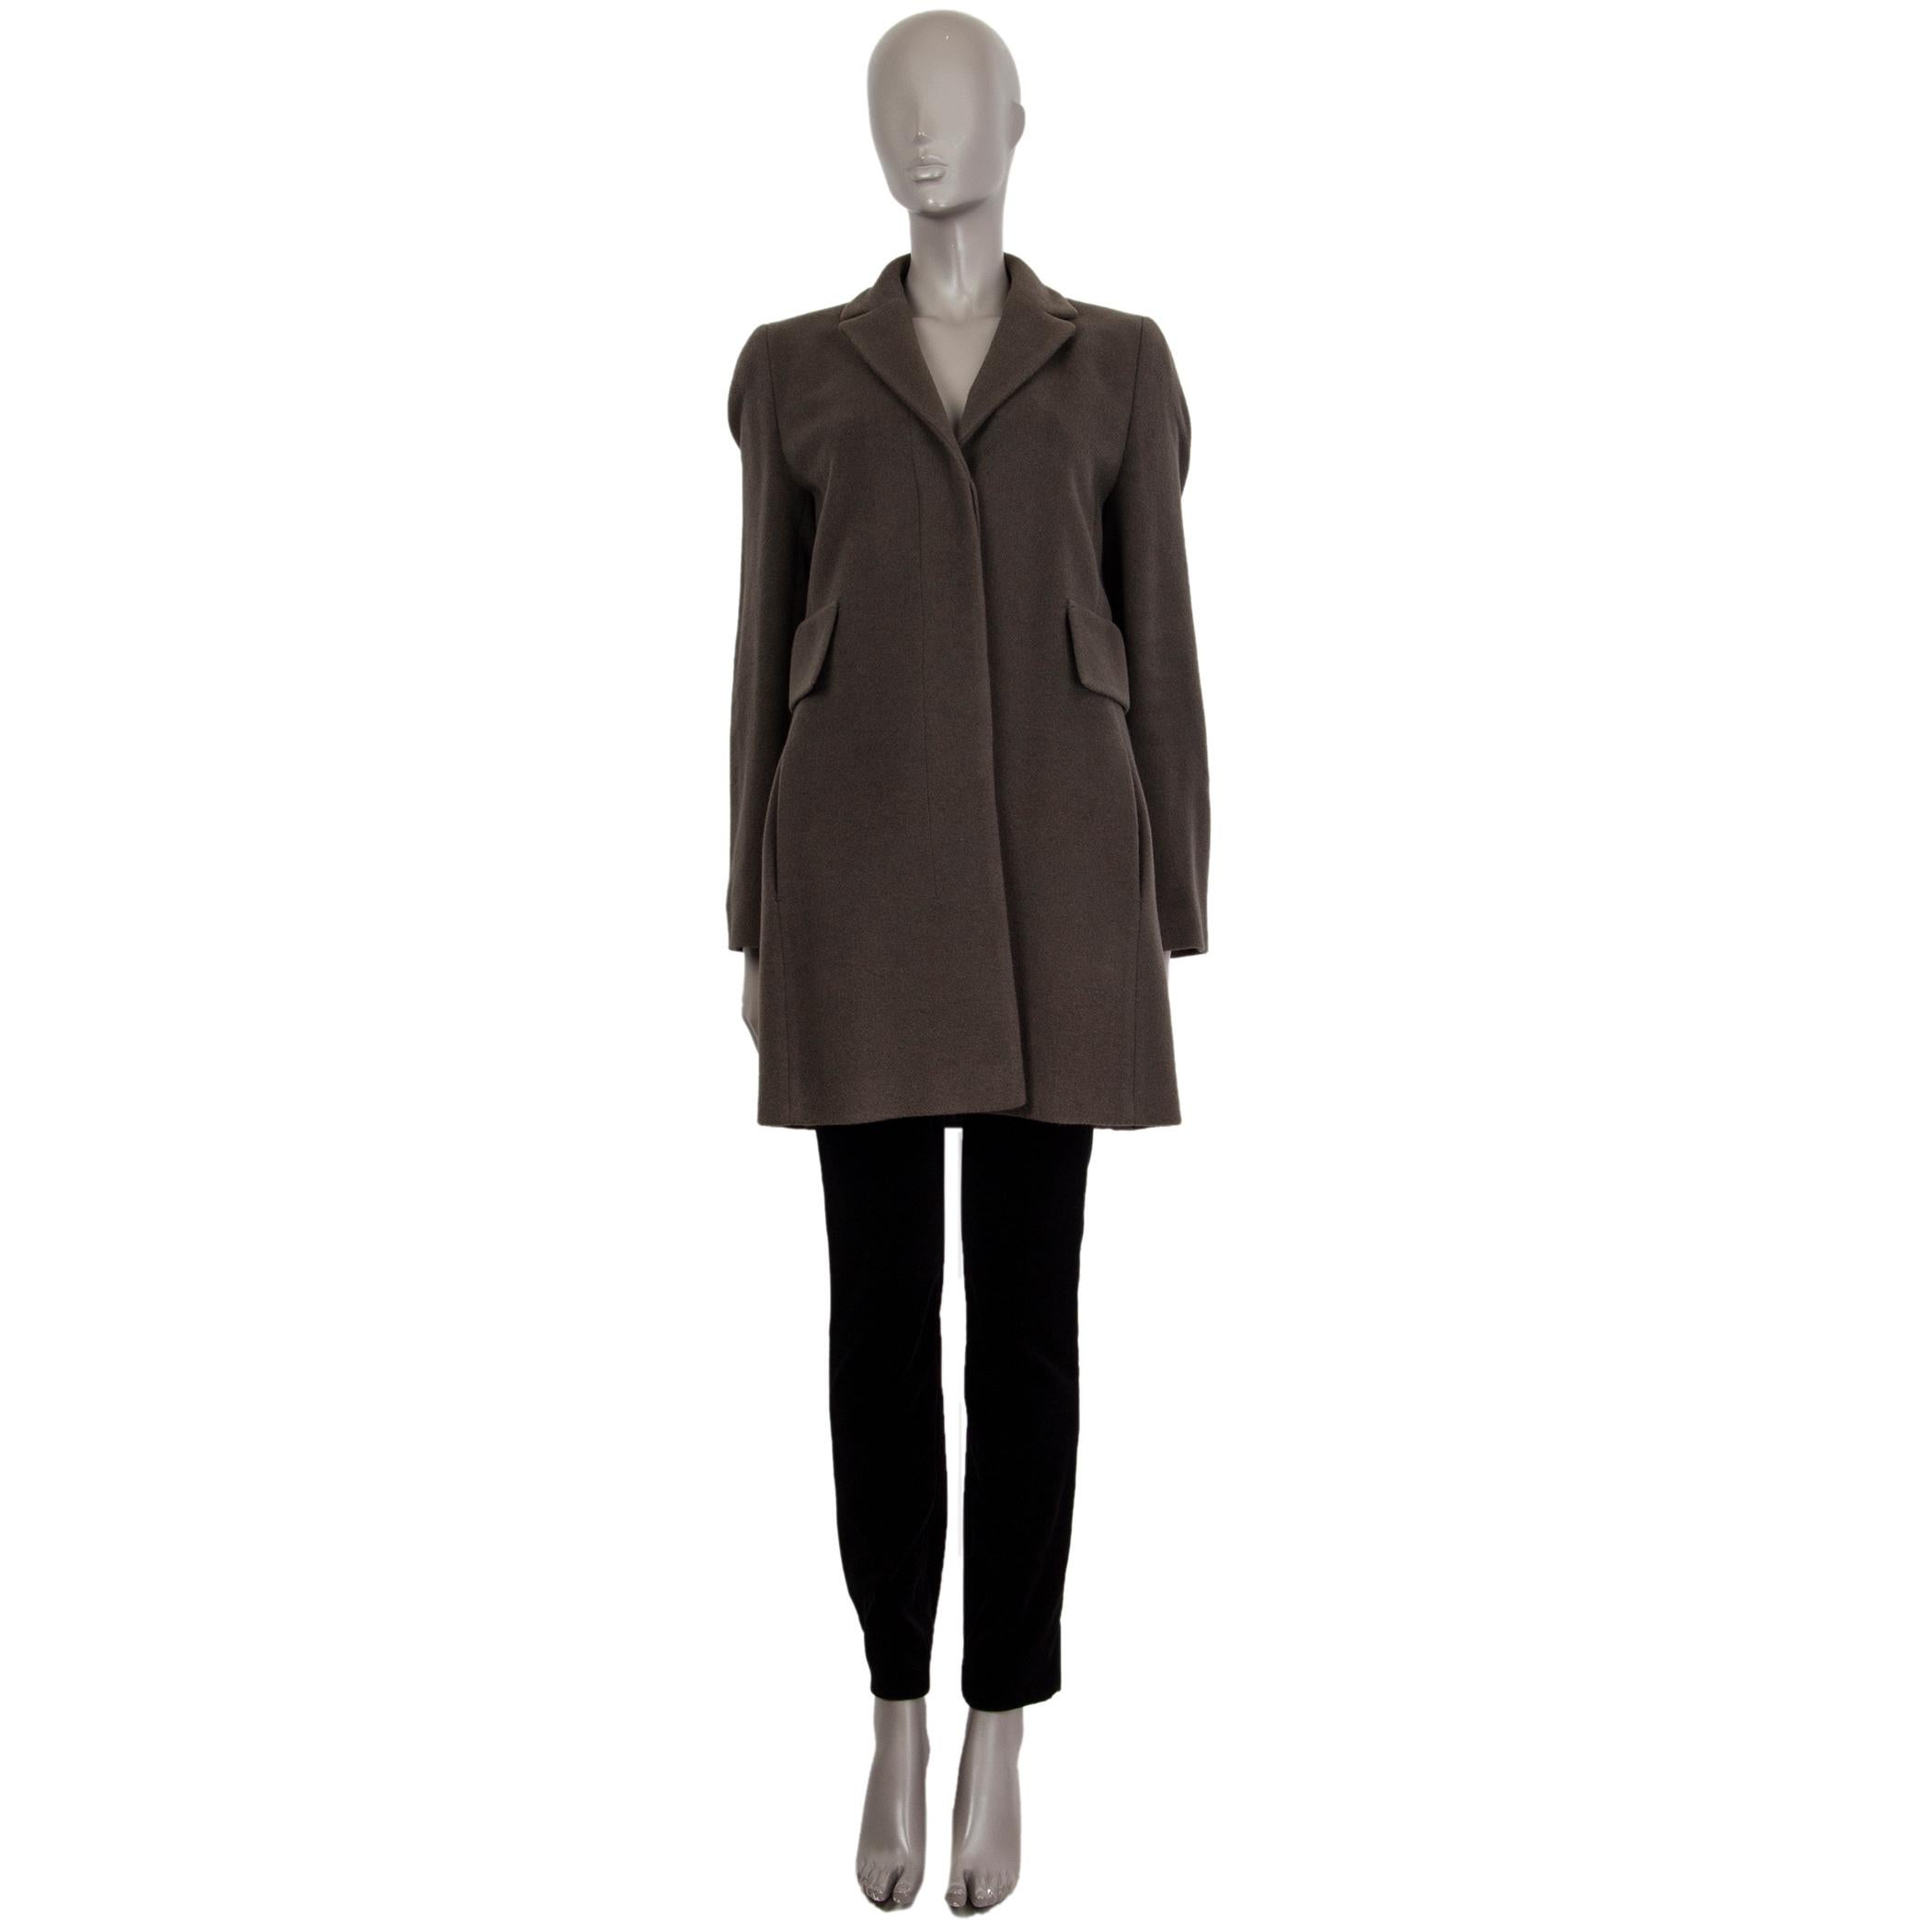 100% authentic Akris Punto classic coat in grey wool (55%) and angora (45%) with a flat collar. Has two decorative flap pockets and two slit pockets on the front. Closes on the front with concealed buttons. Lined in viscose. Has been worn and is in